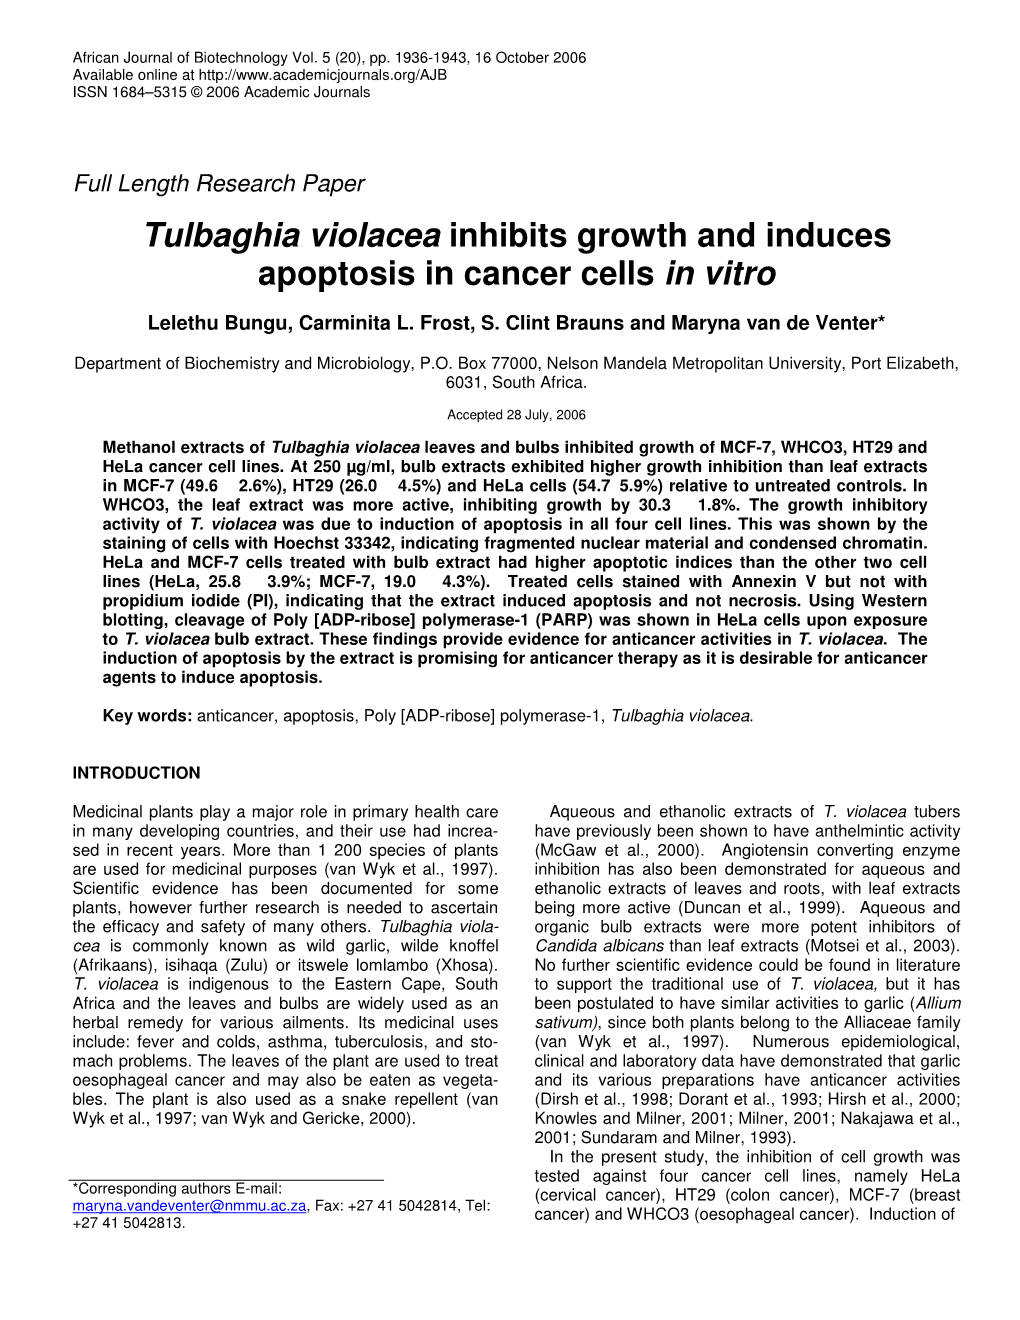 Tulbaghia Violacea Inhibits Growth and Induces Apoptosis in Cancer Cells in Vitro